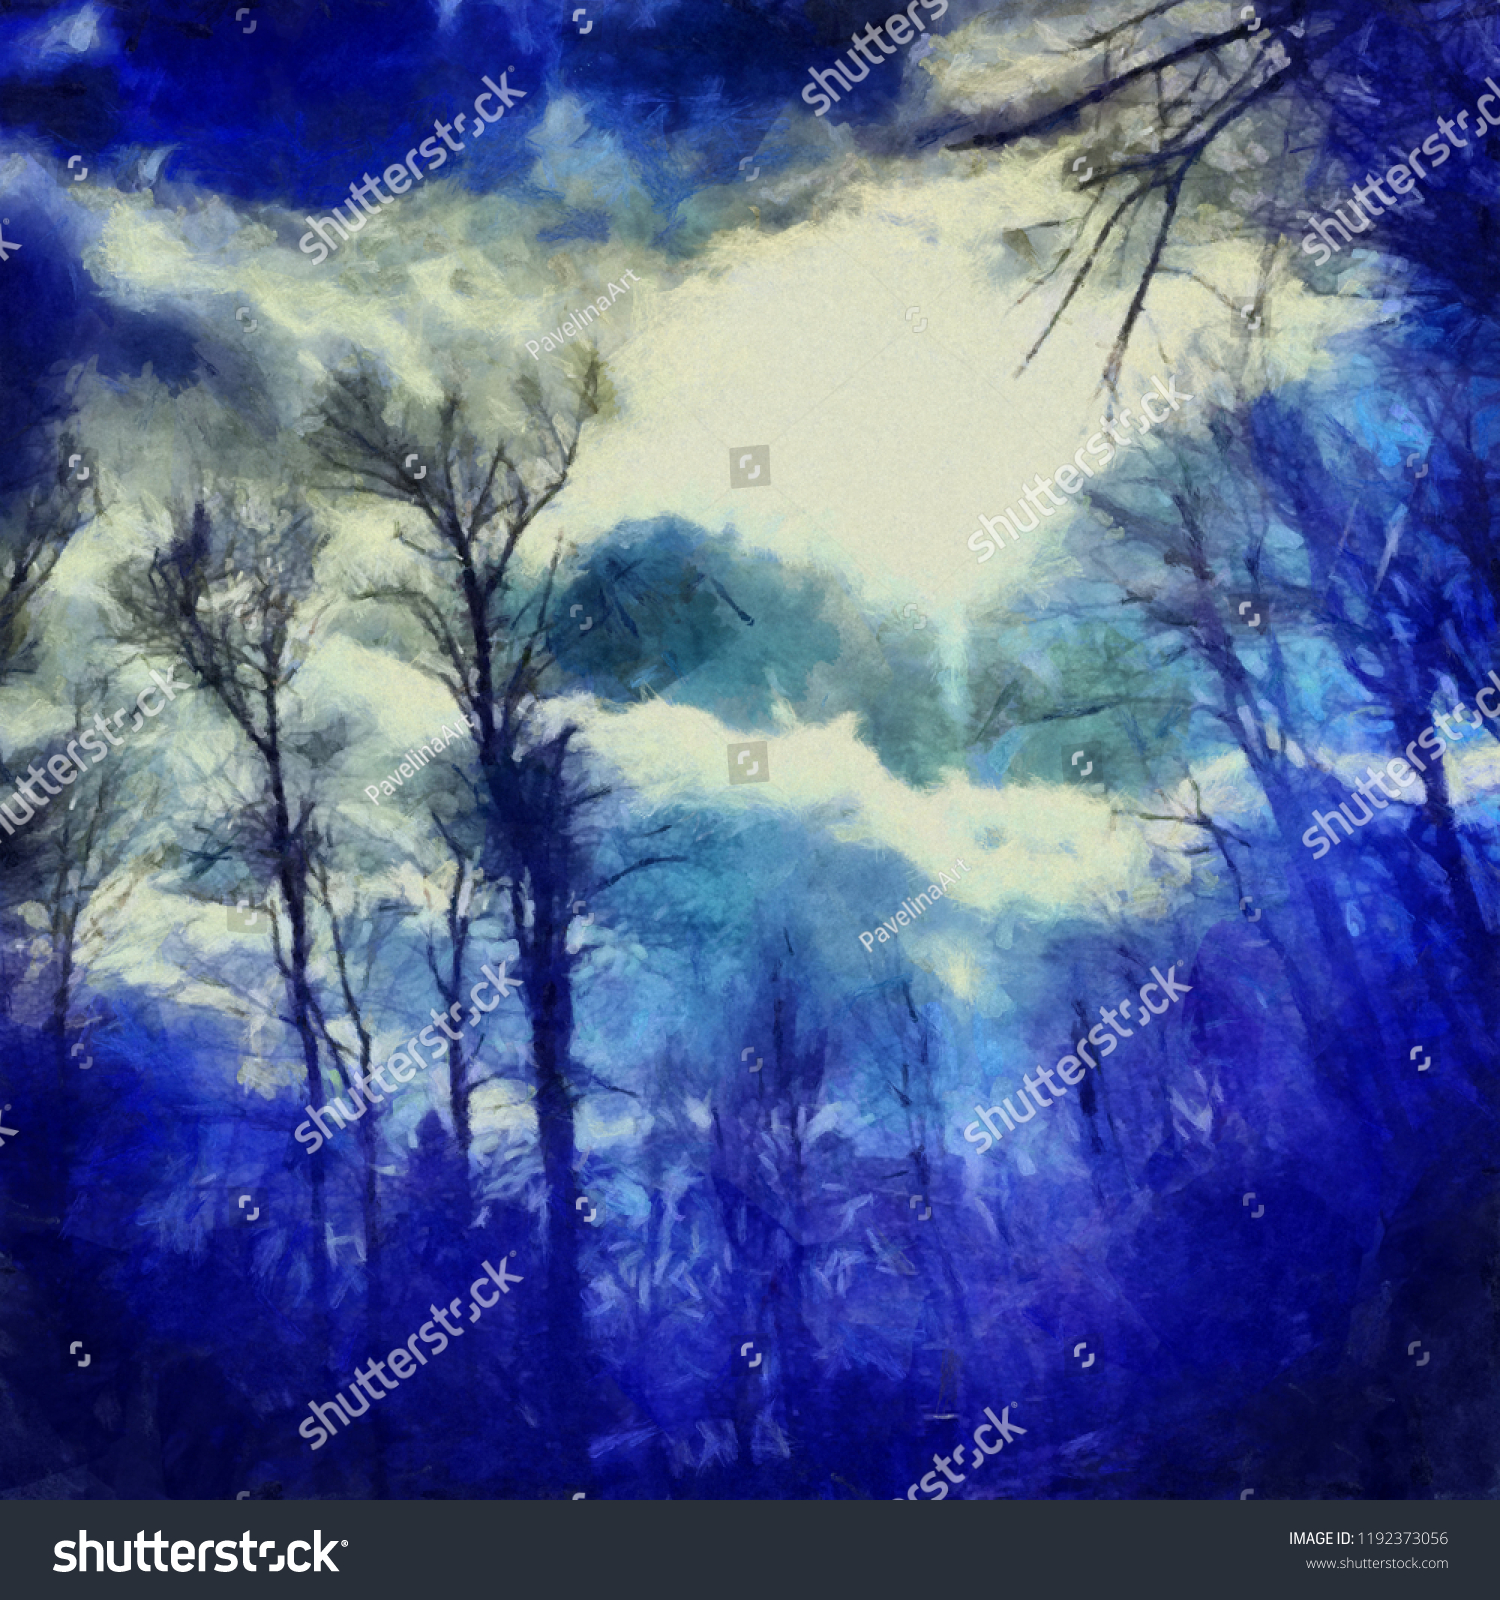 Oil painting. Art print for wall decor. Acrylic artwork. Big size poster. Watercolor drawing. Modern style fine art. Beautiful charming forest landscape. Trees without leaves. Dark blue sky. #1192373056